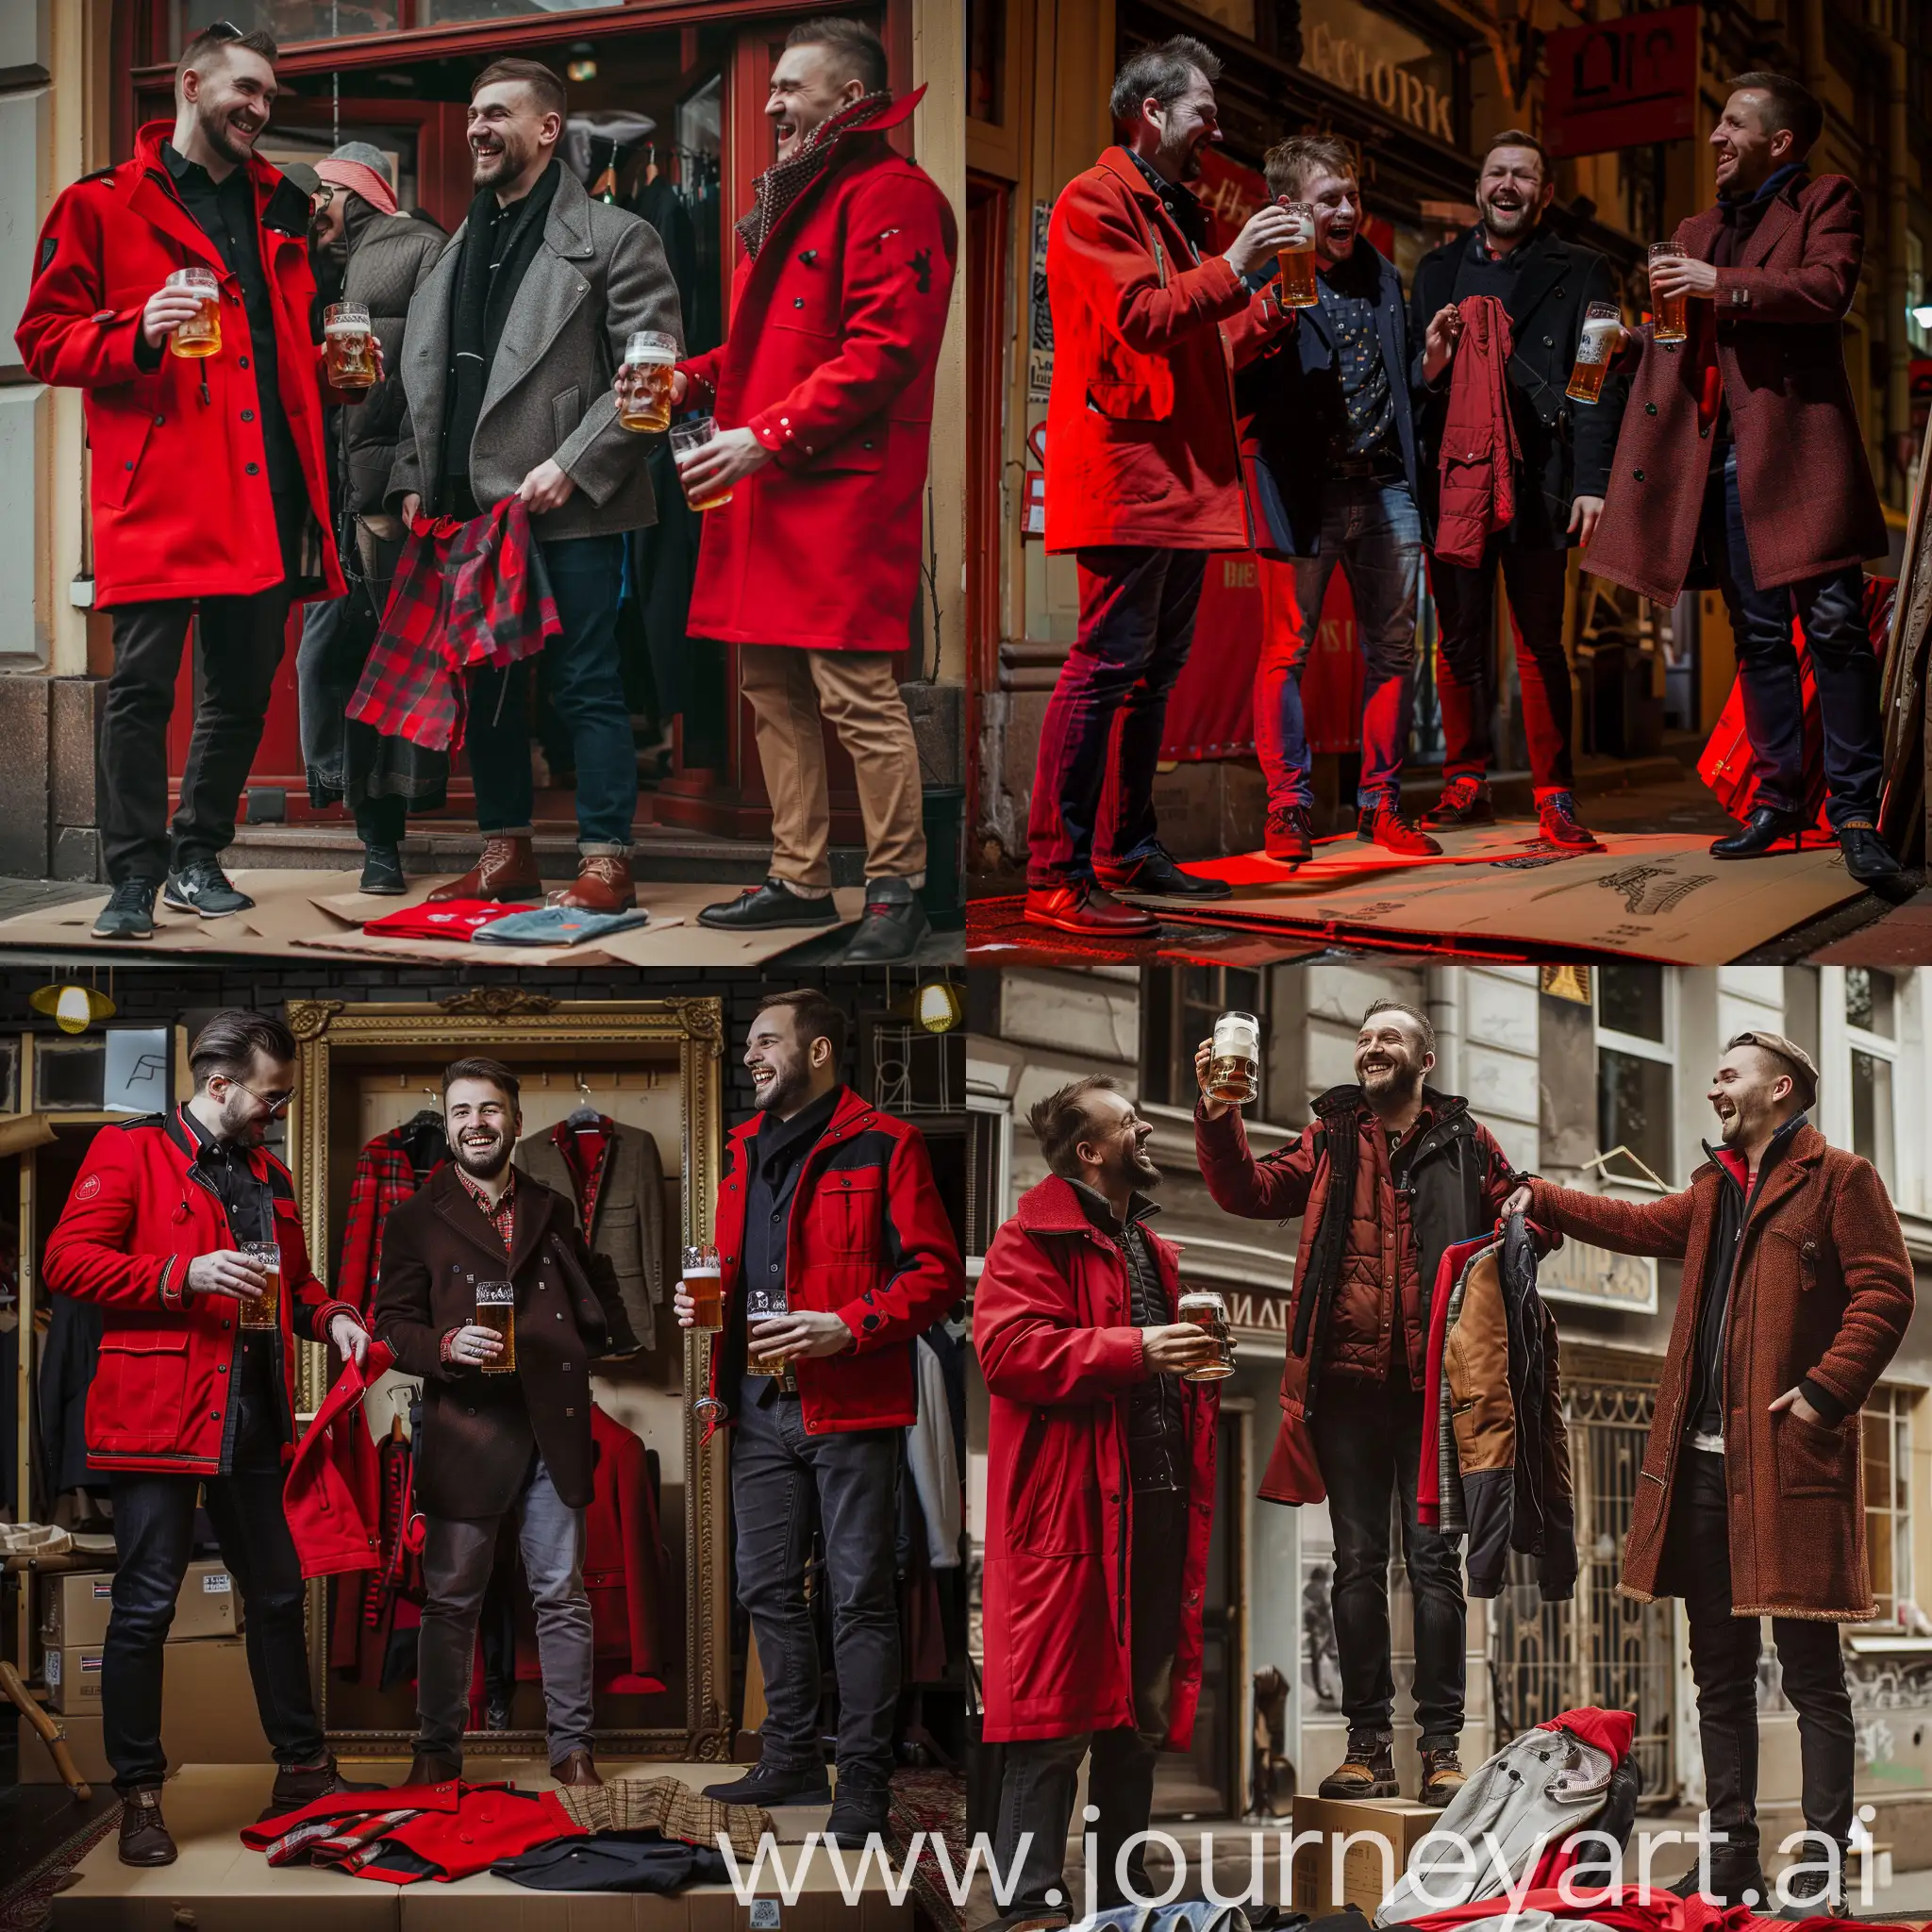 Gentlemen choosing vintage clothes in the market of St. Petersburg, standing on cardboard, holding glasses of beer, laughing, holding everything in red-and-black dramatic colours red and black colour scheme, dramatic lighting, detailed